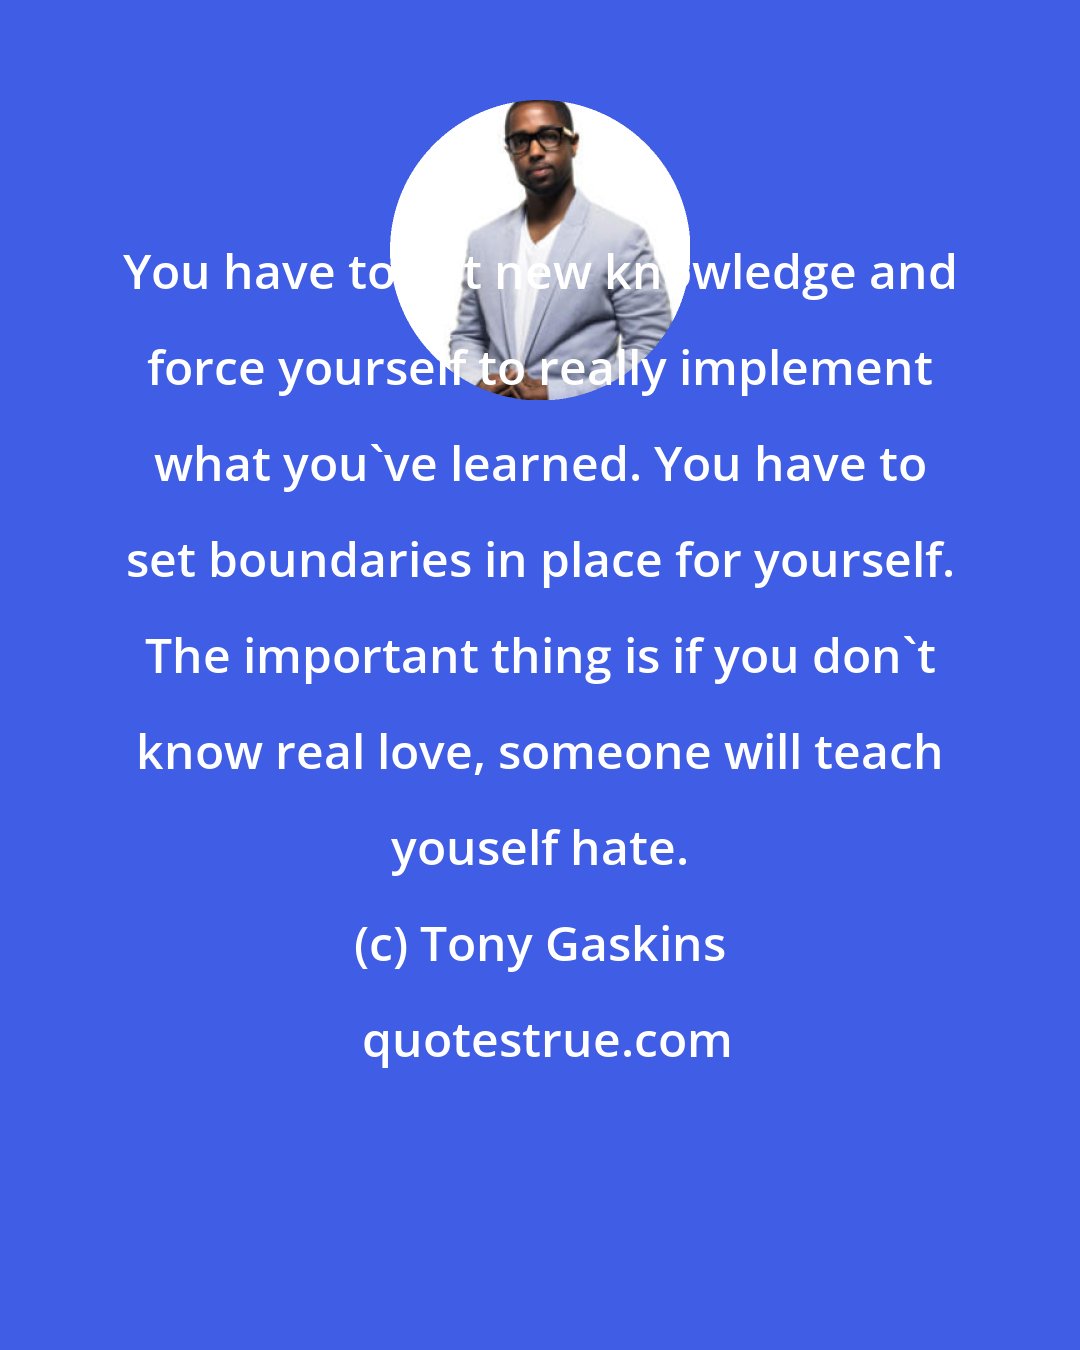 Tony Gaskins: You have to get new knowledge and force yourself to really implement what you've learned. You have to set boundaries in place for yourself. The important thing is if you don't know real love, someone will teach youself hate.